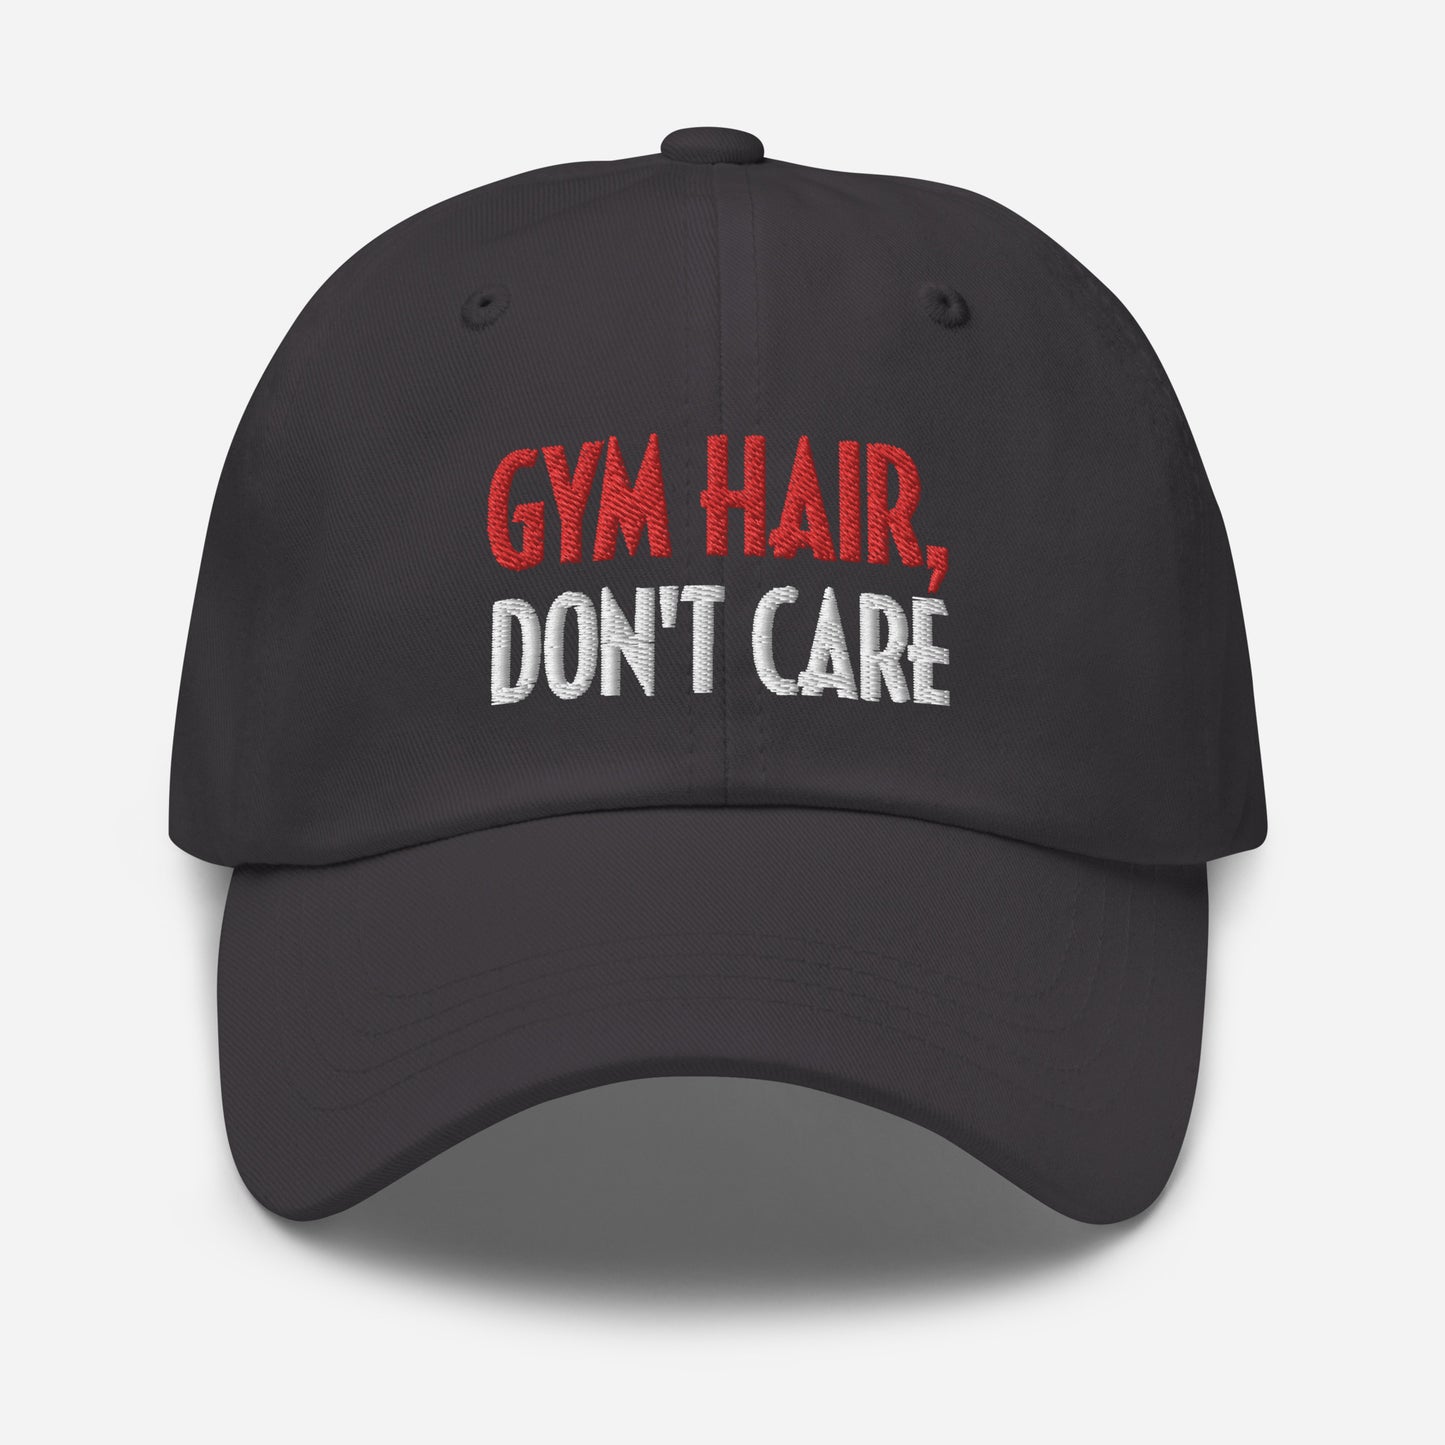 Gym hair dont care Dad hat